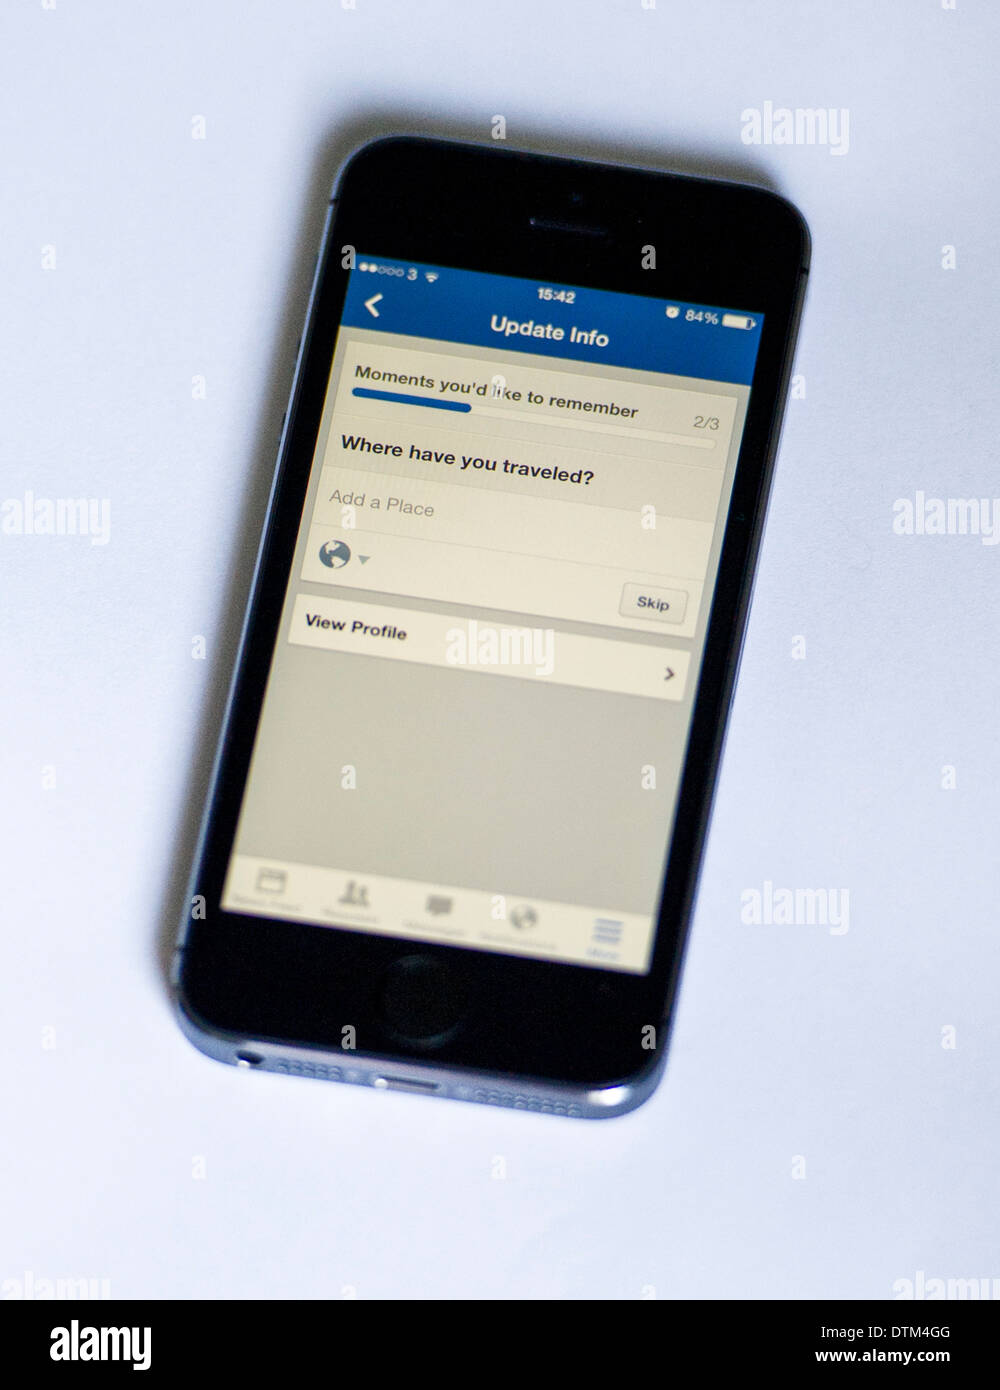 An iPhone 5S on a white  background, showing the Facebook app asking the user where they have traveled. Stock Photo